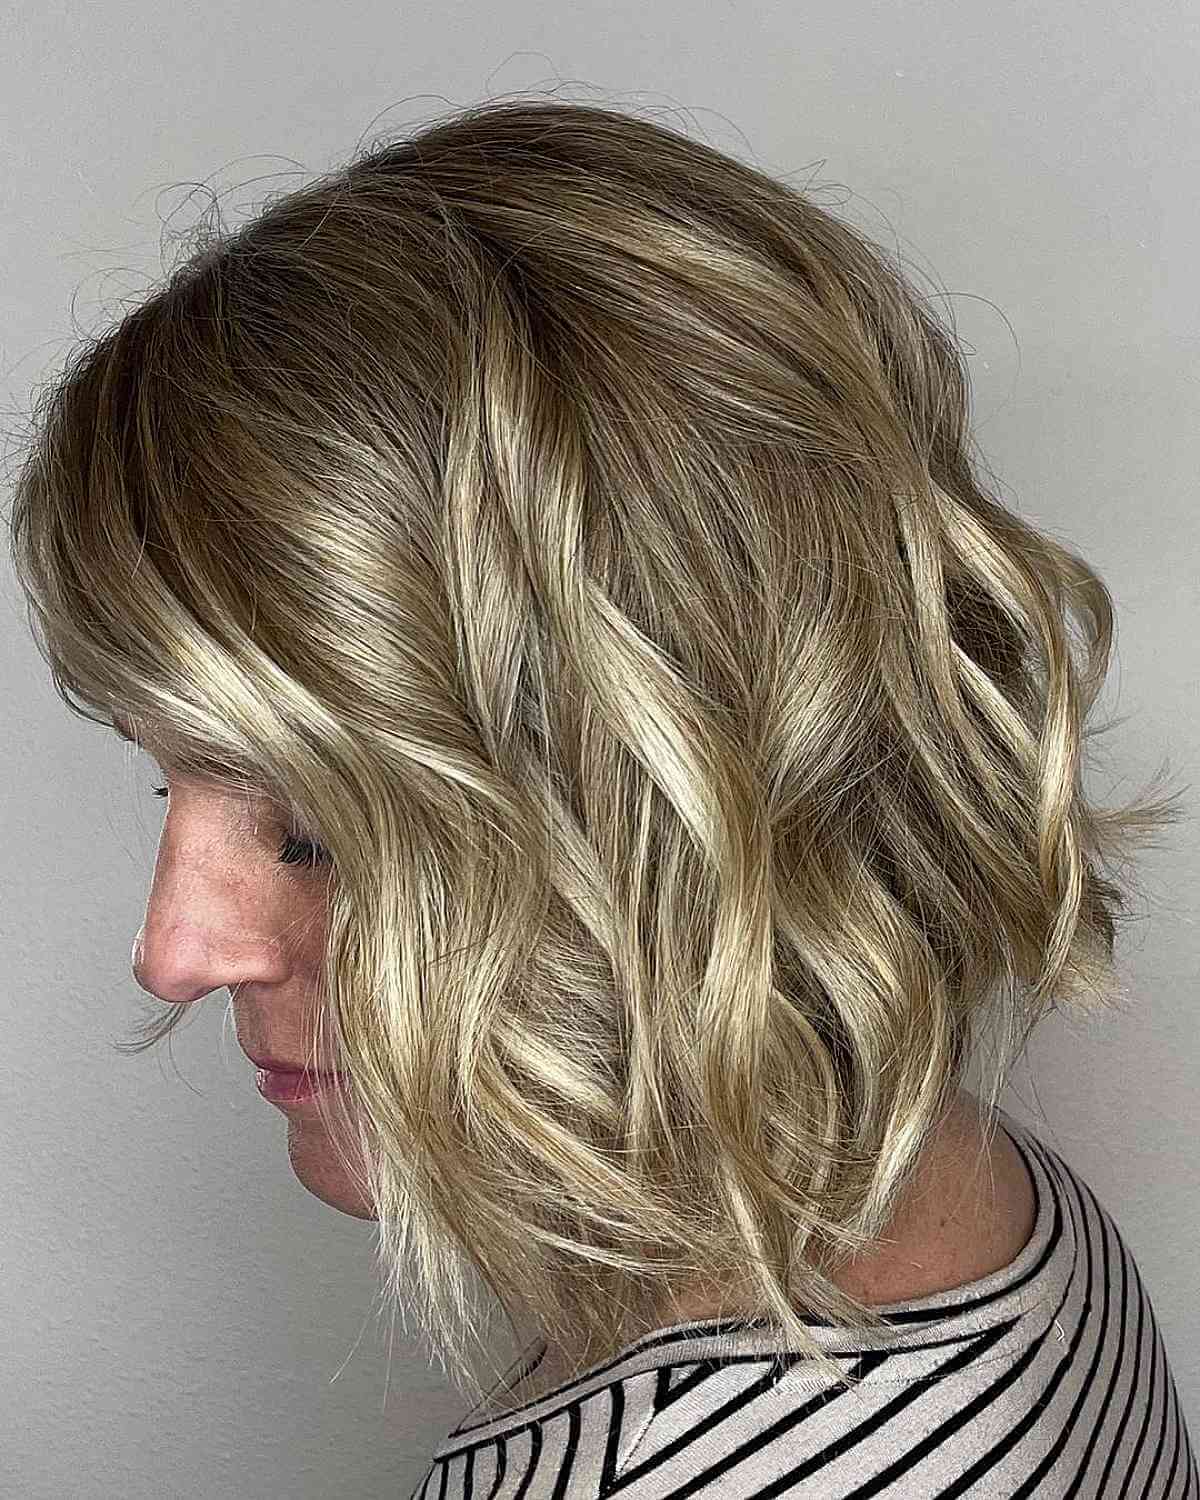 Long Choppy Bob with Beach Waves for Women Over 40